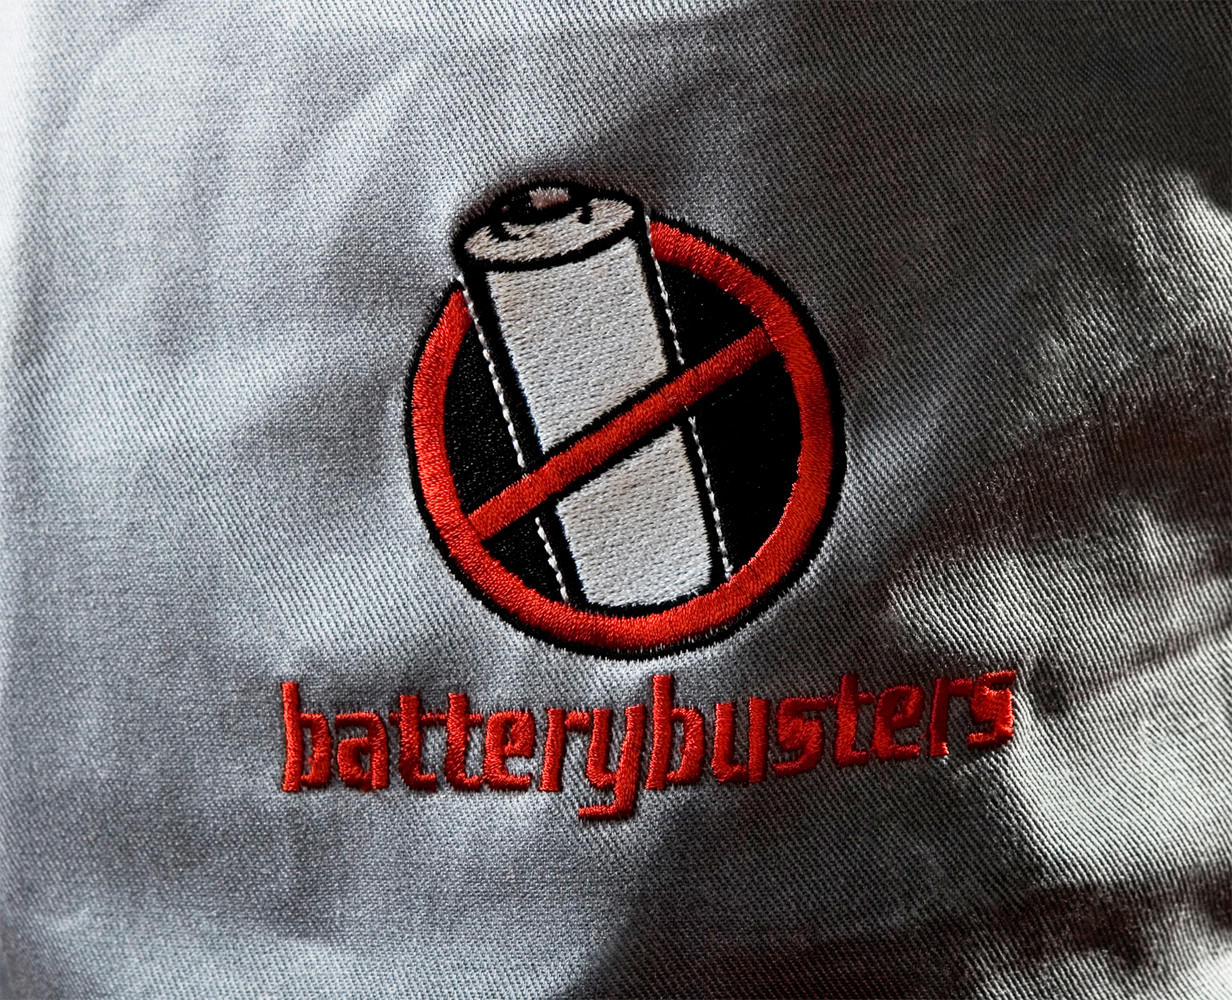 Battery Busters Fraunhofer IPA